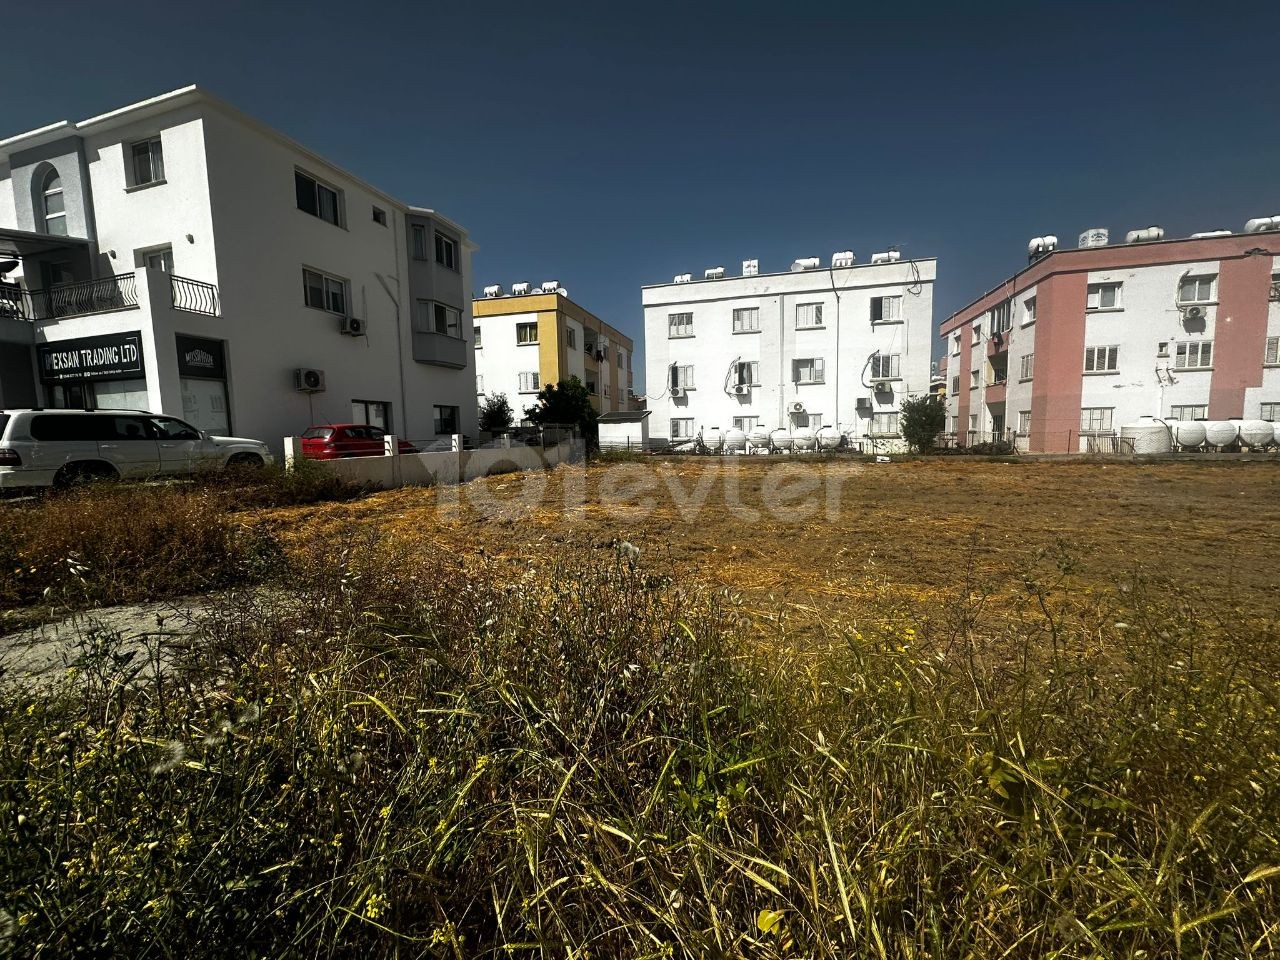 LAND FOR RENTAL IN YENIKENT REGION SUITABLE TO BE A GALLERY WITH MONTHLY PAYMENT